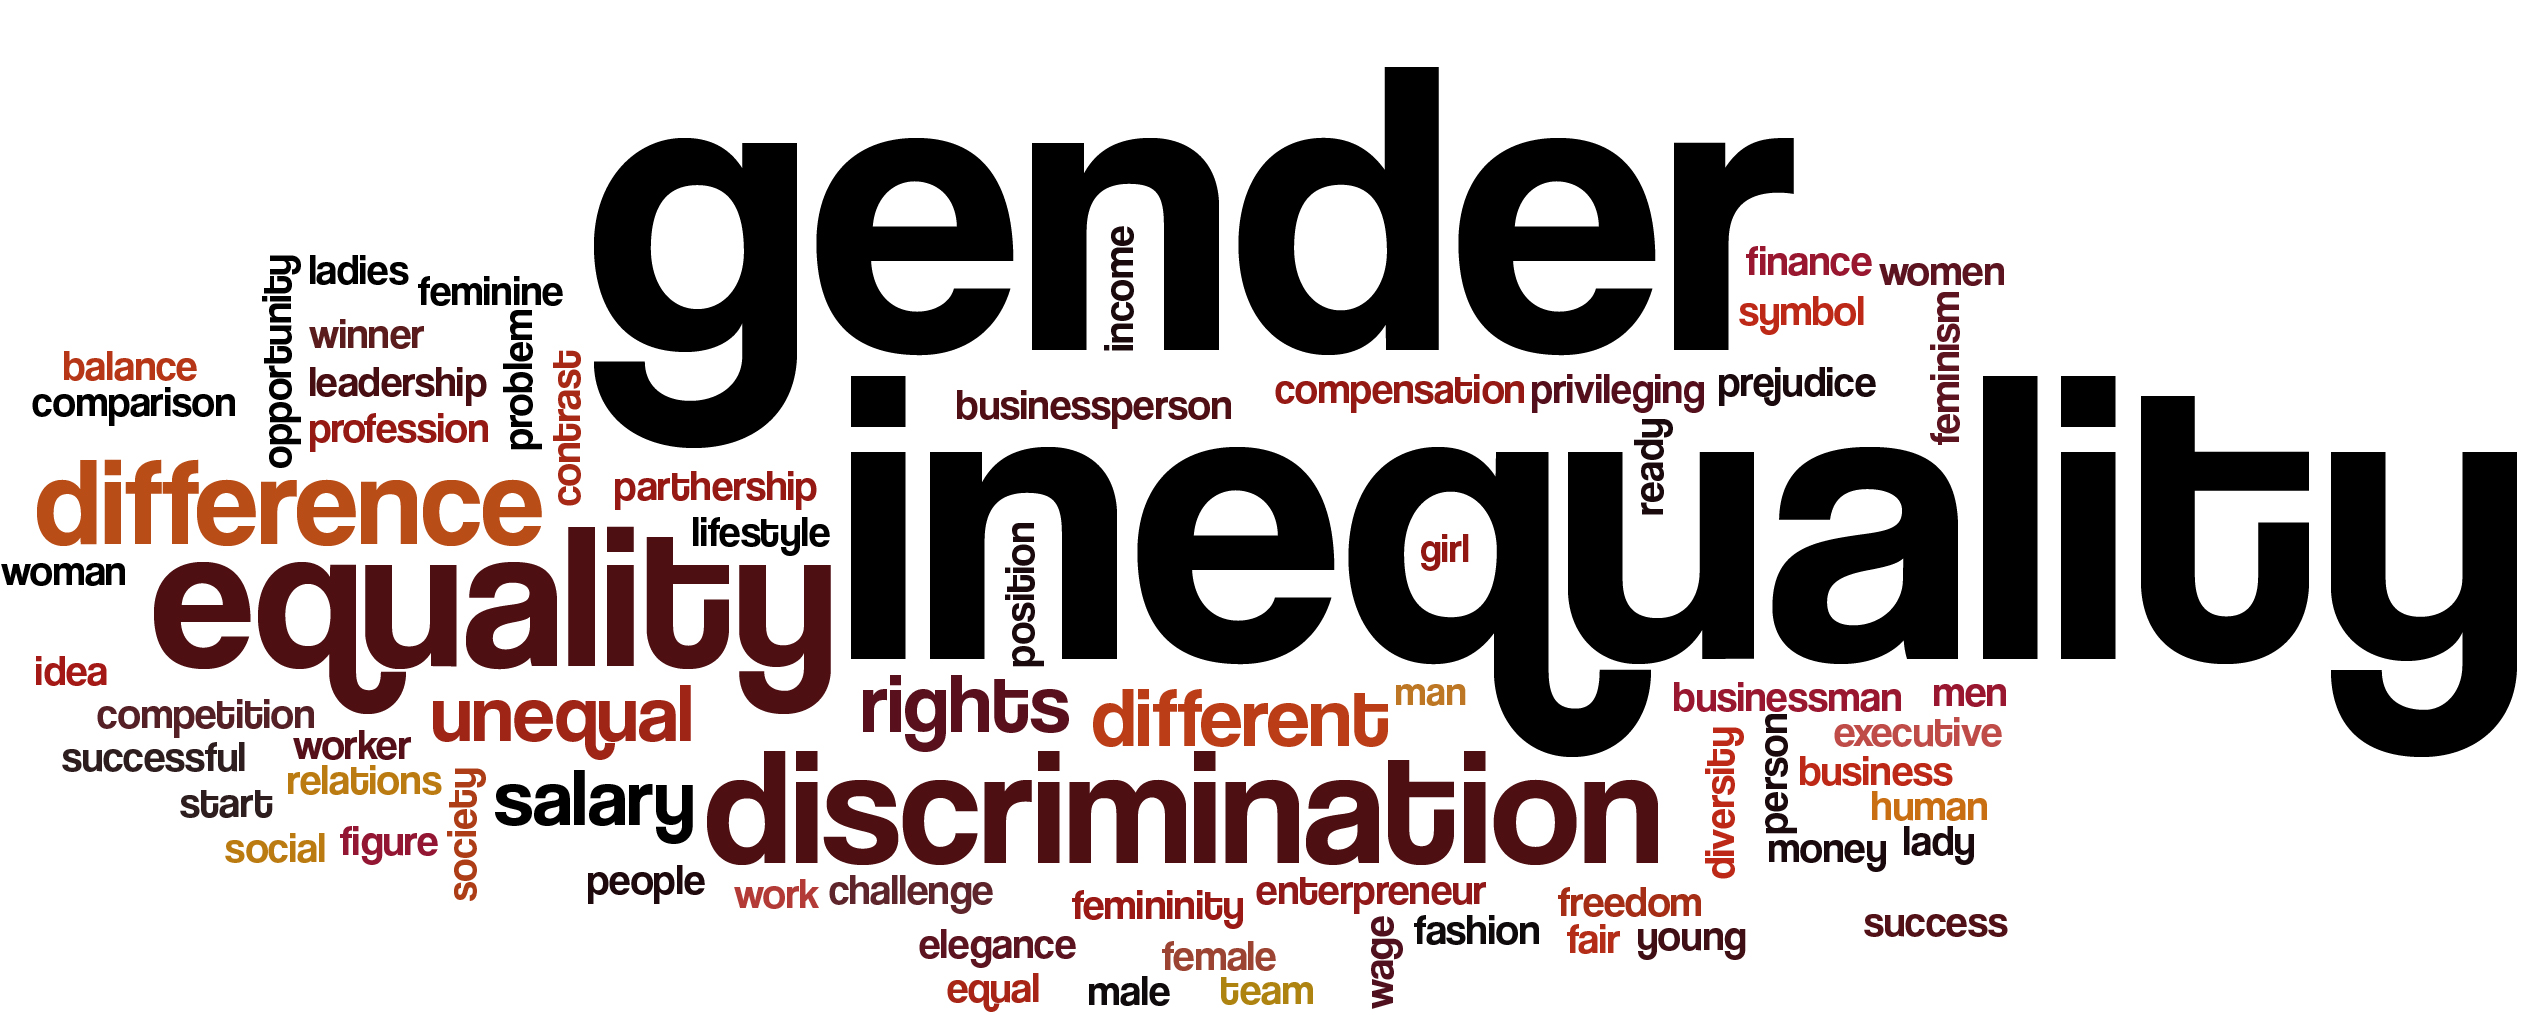 graphic of words related to gender equality